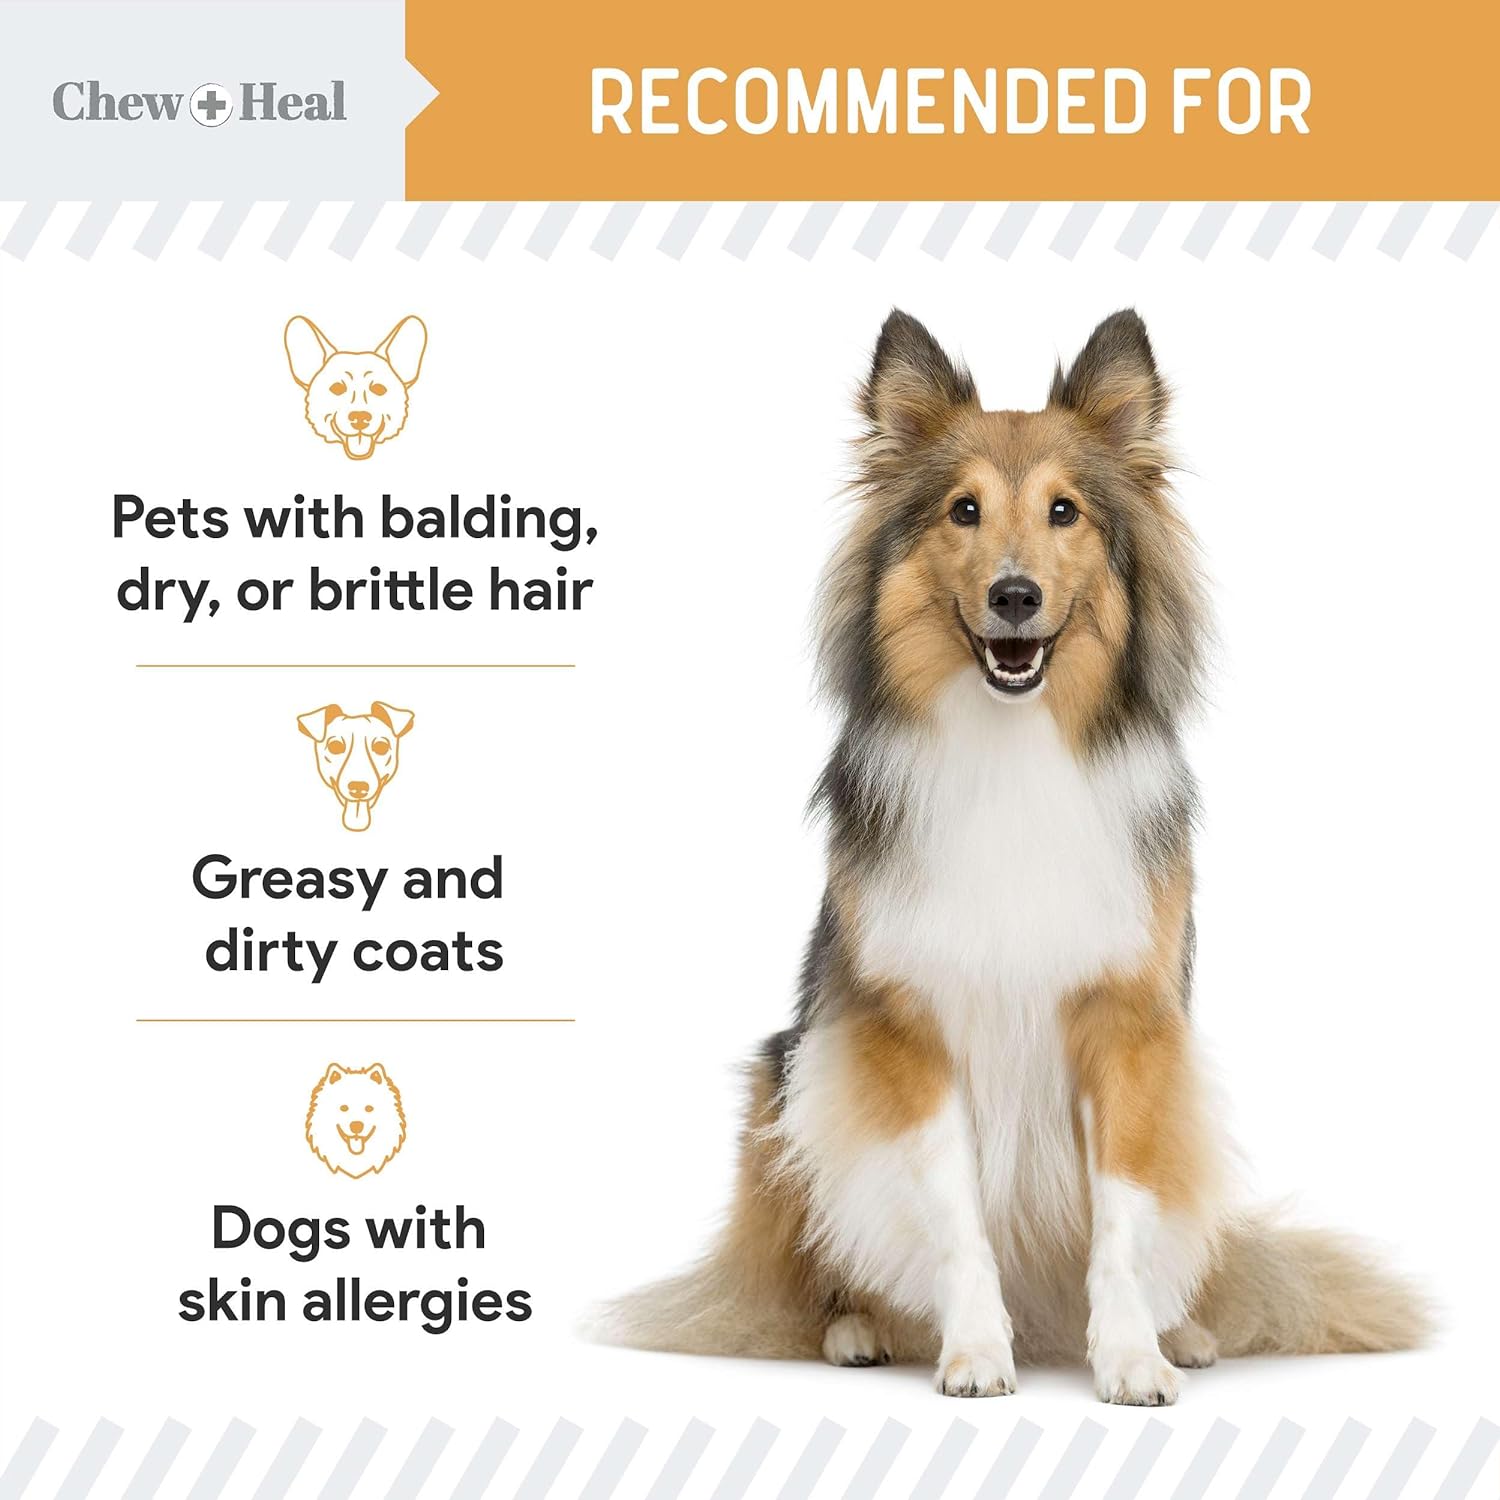 Salmon Oil for Dogs - 180 Soft Chew Omega Treats for Skin and Coat - Fish Oil Blend of Essential Fatty Acids, Omega 3 and 6, Vitamins, Antioxidants and Minerals - Made in USA : Pet Supplies